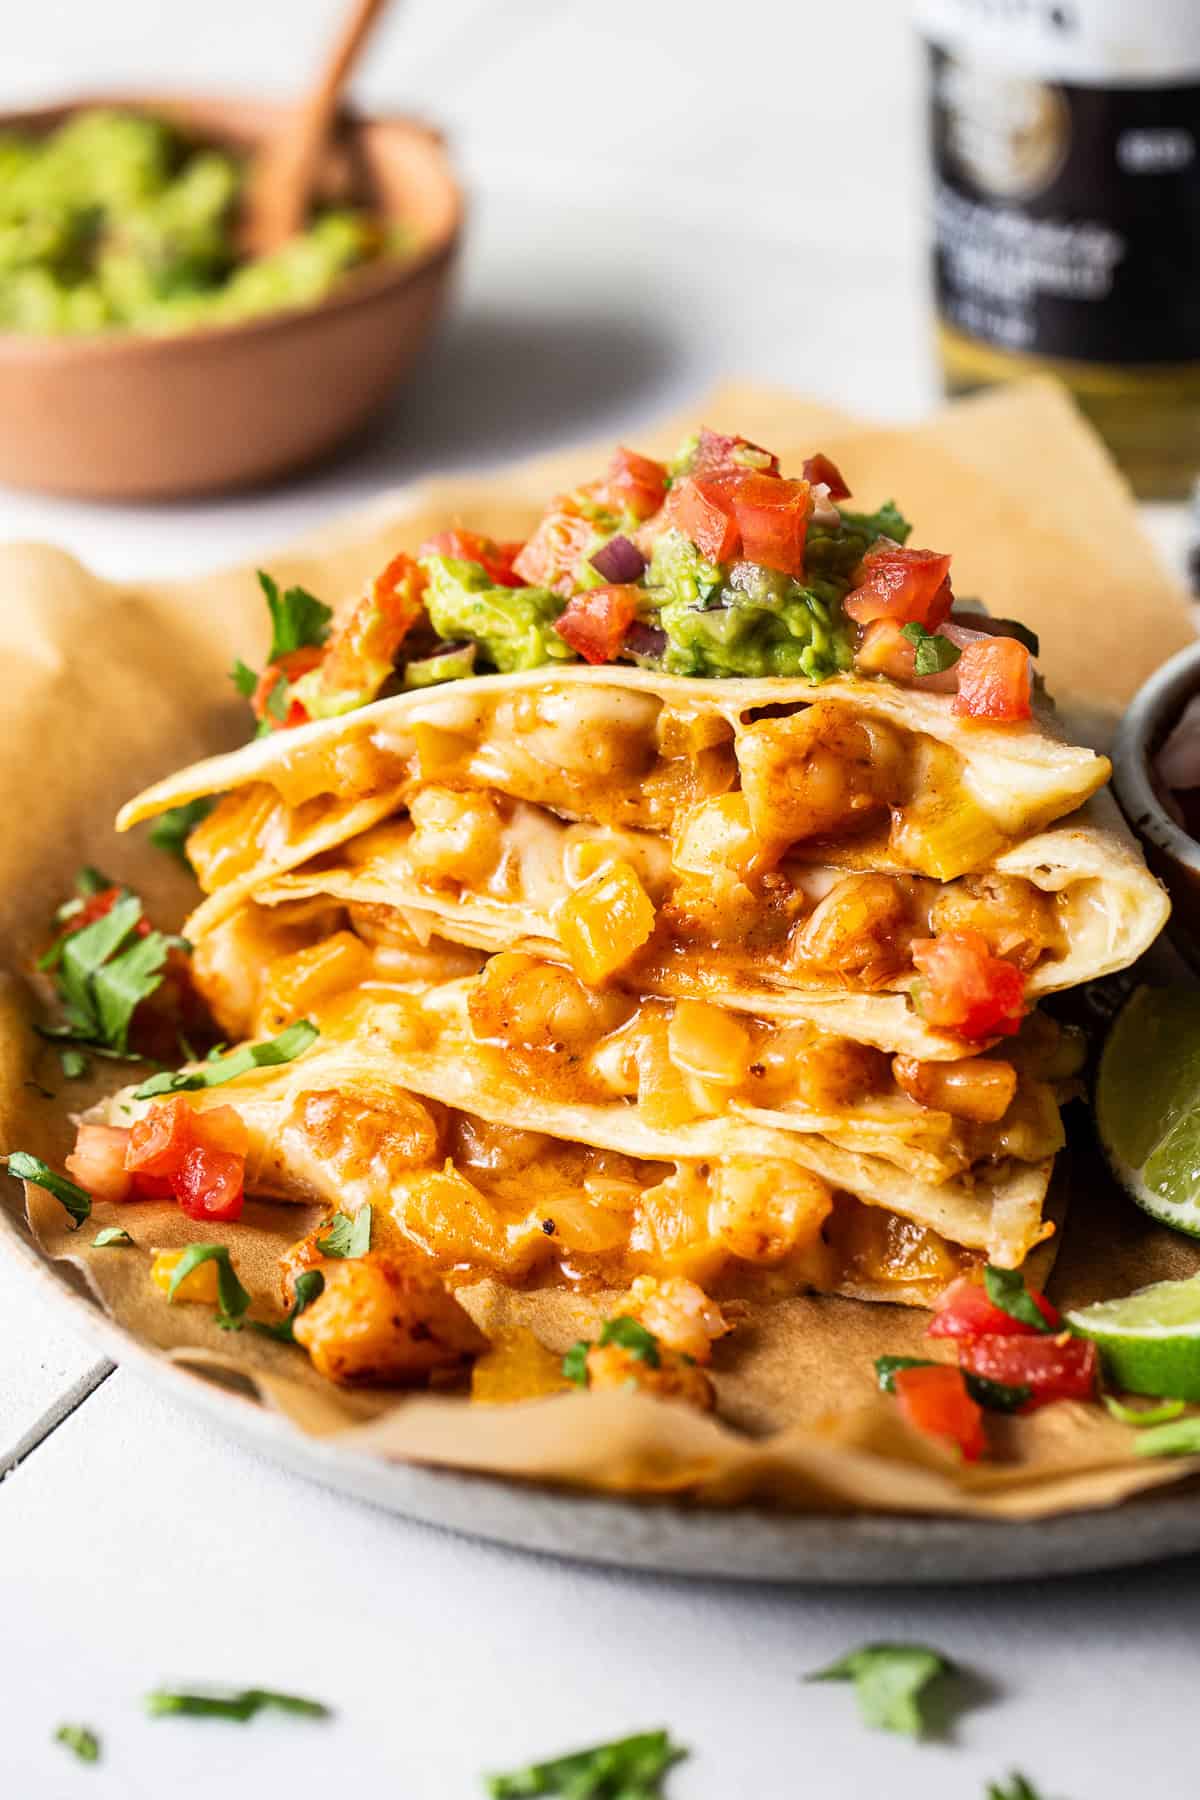 Shrimp quesadillas stacked on top of one another.